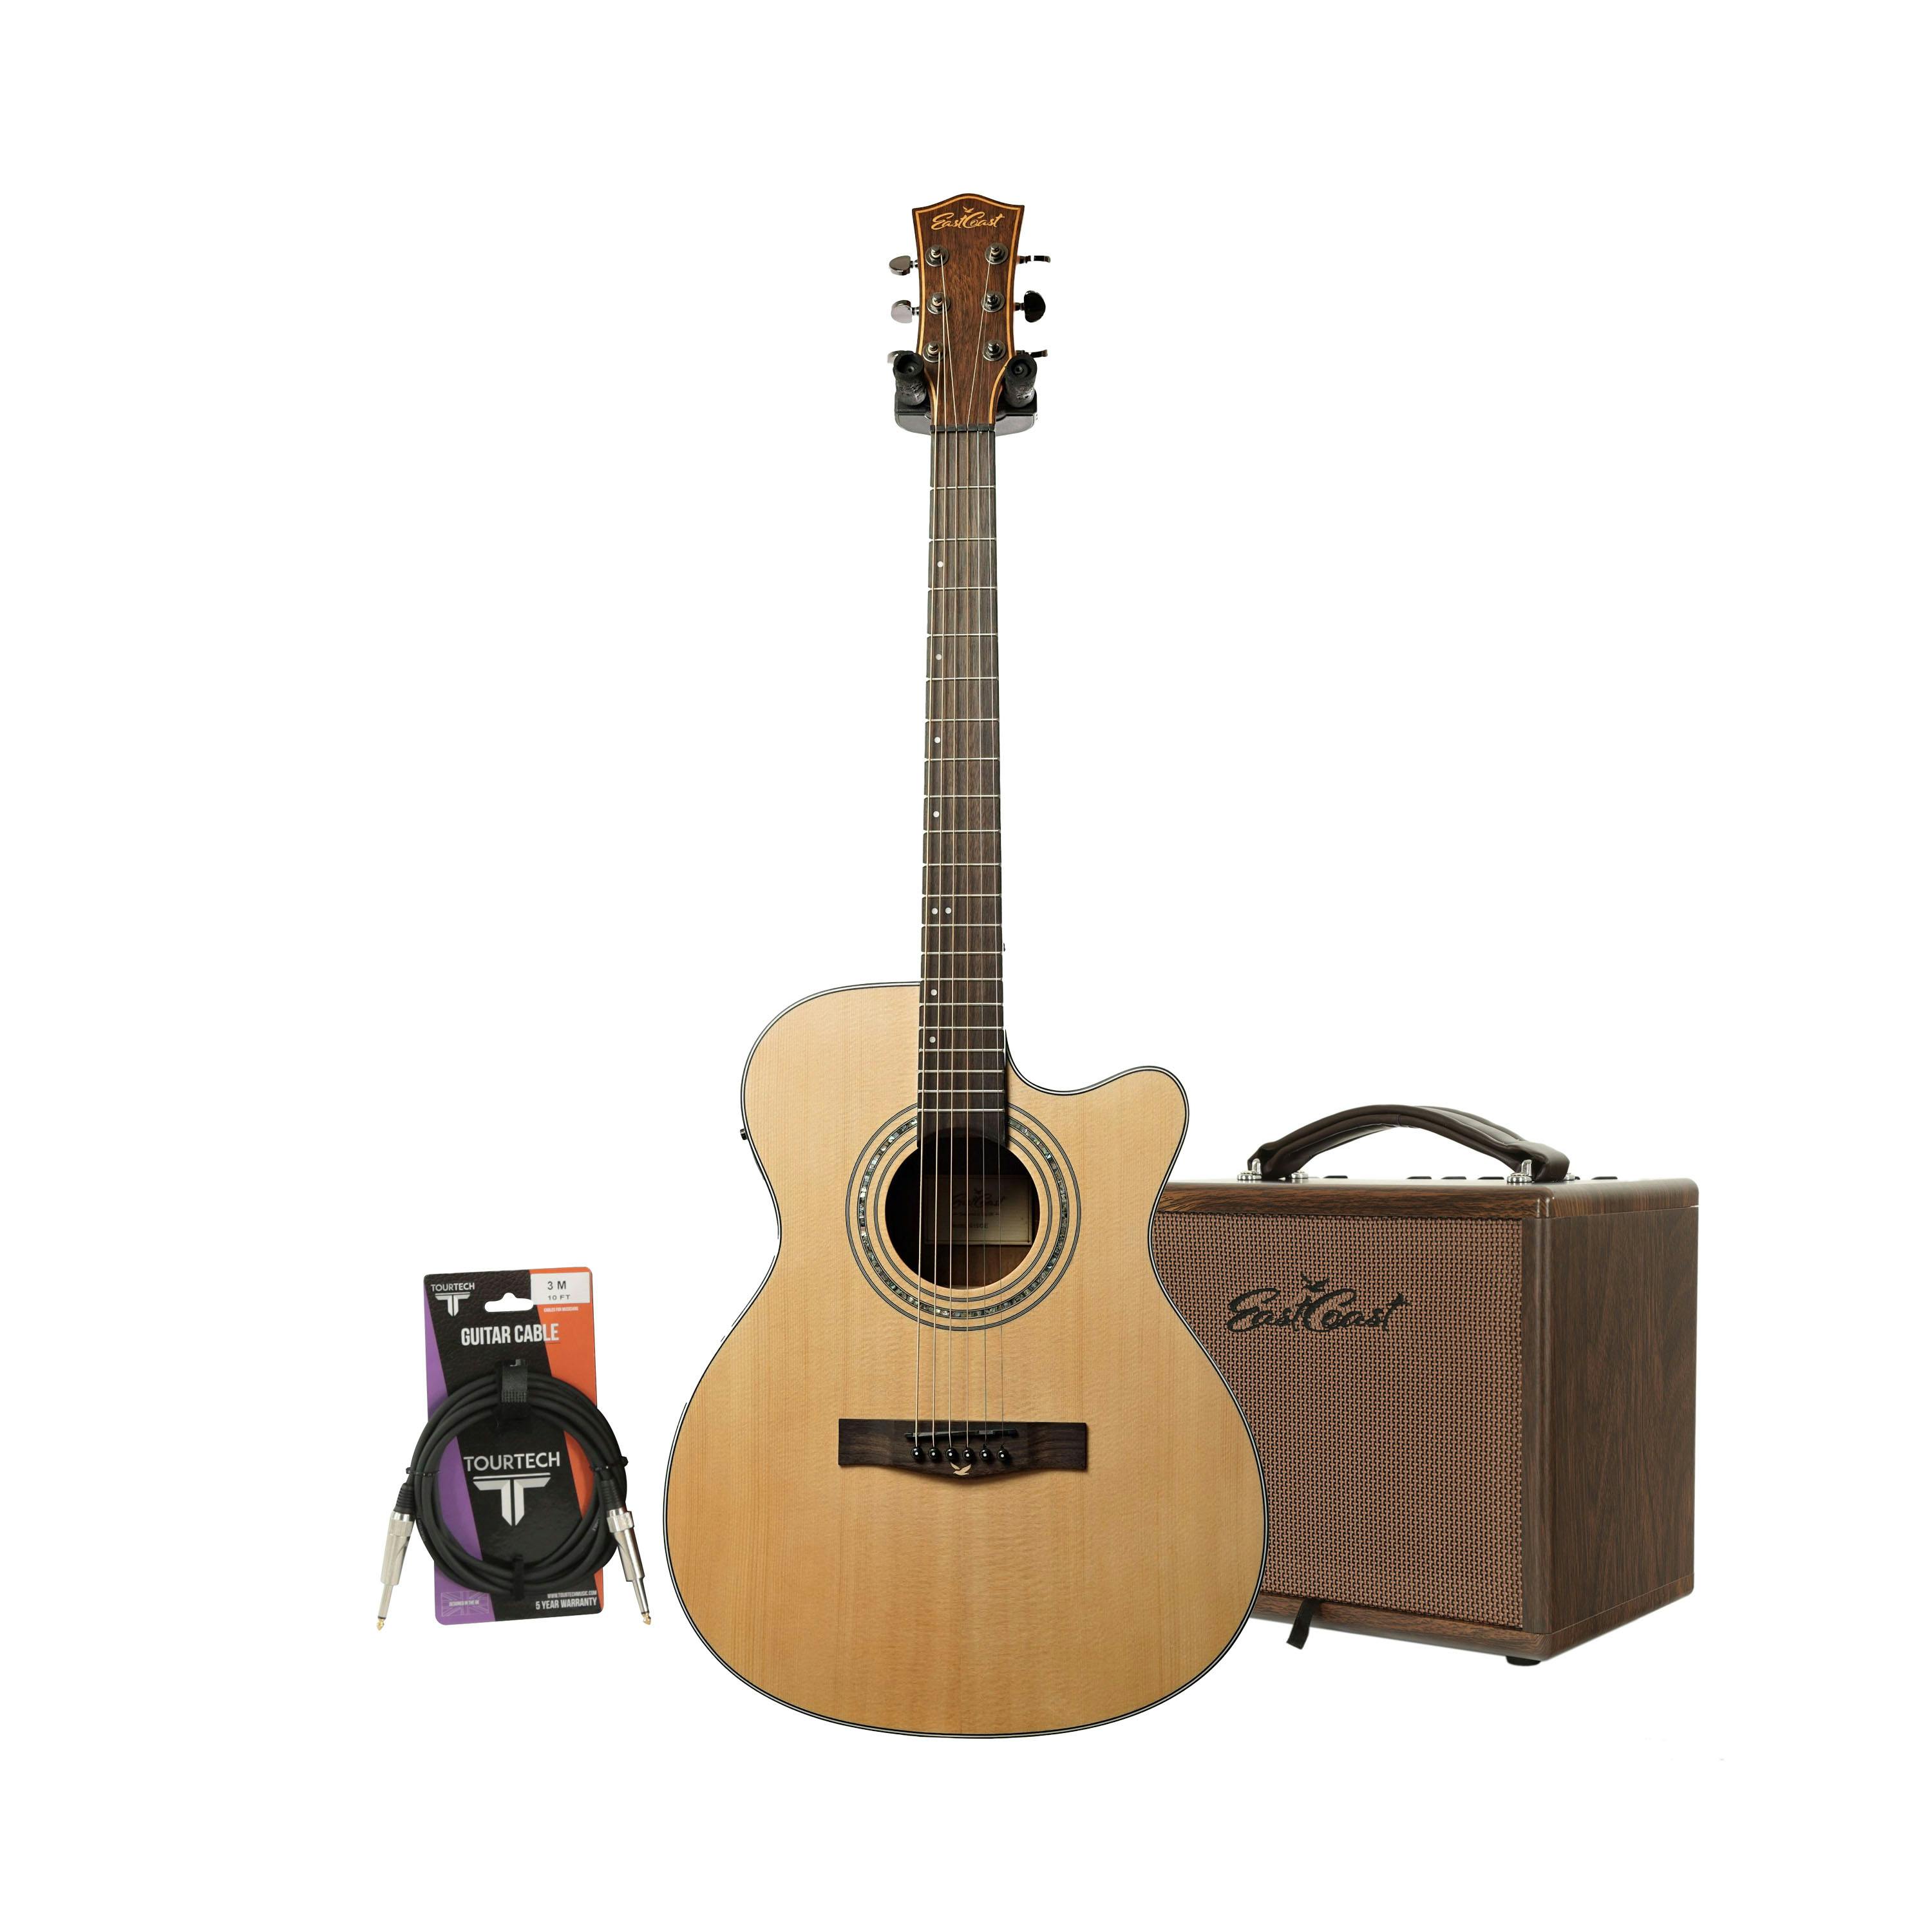 signmeili 38” Green Cutaway Acoustic GuitarsAcoustic Guitar The First Guitar for Beginners Classical Guitar Set with Strings and Picks 